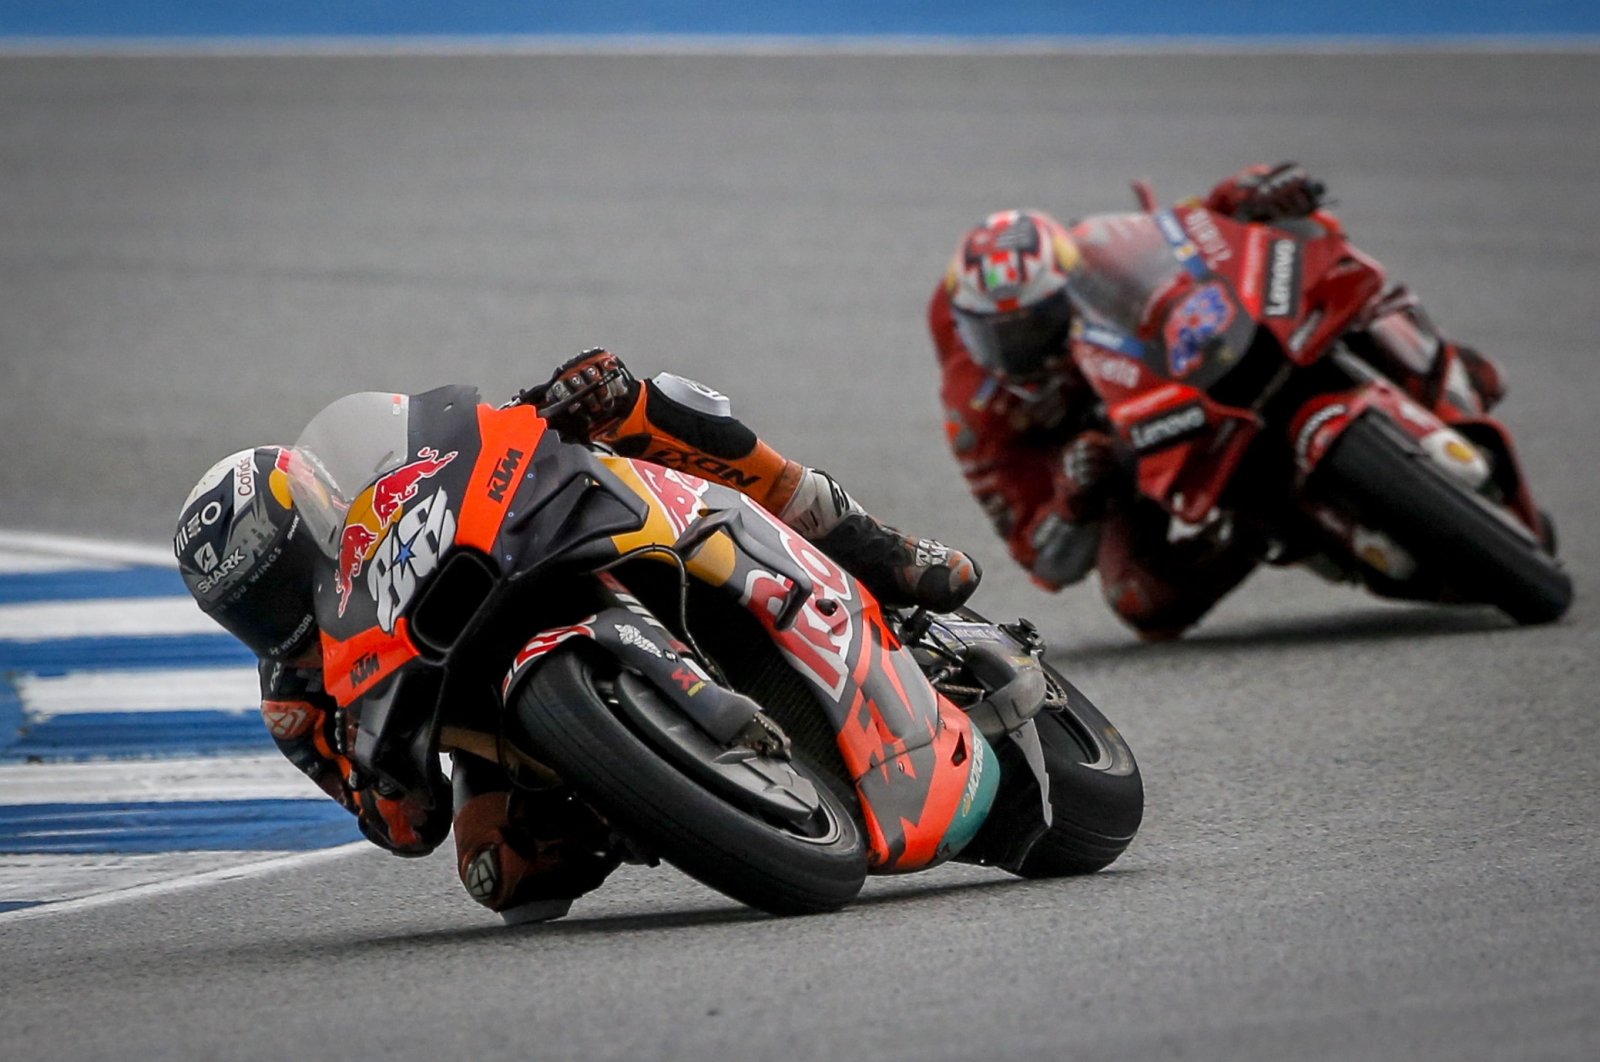 Portuguese MotoGP rider Miguel Oliveira (L) of Red Bull KTM Factory Racing in action ahead of Australian MotoGP rider Jack Miller of Ducati Lenovo Team during the Motorcycling Grand Prix of Thailand at Chang International Circuit, Buriram province, Thailand, Oct. 2, 2022.  (EPA Photo)